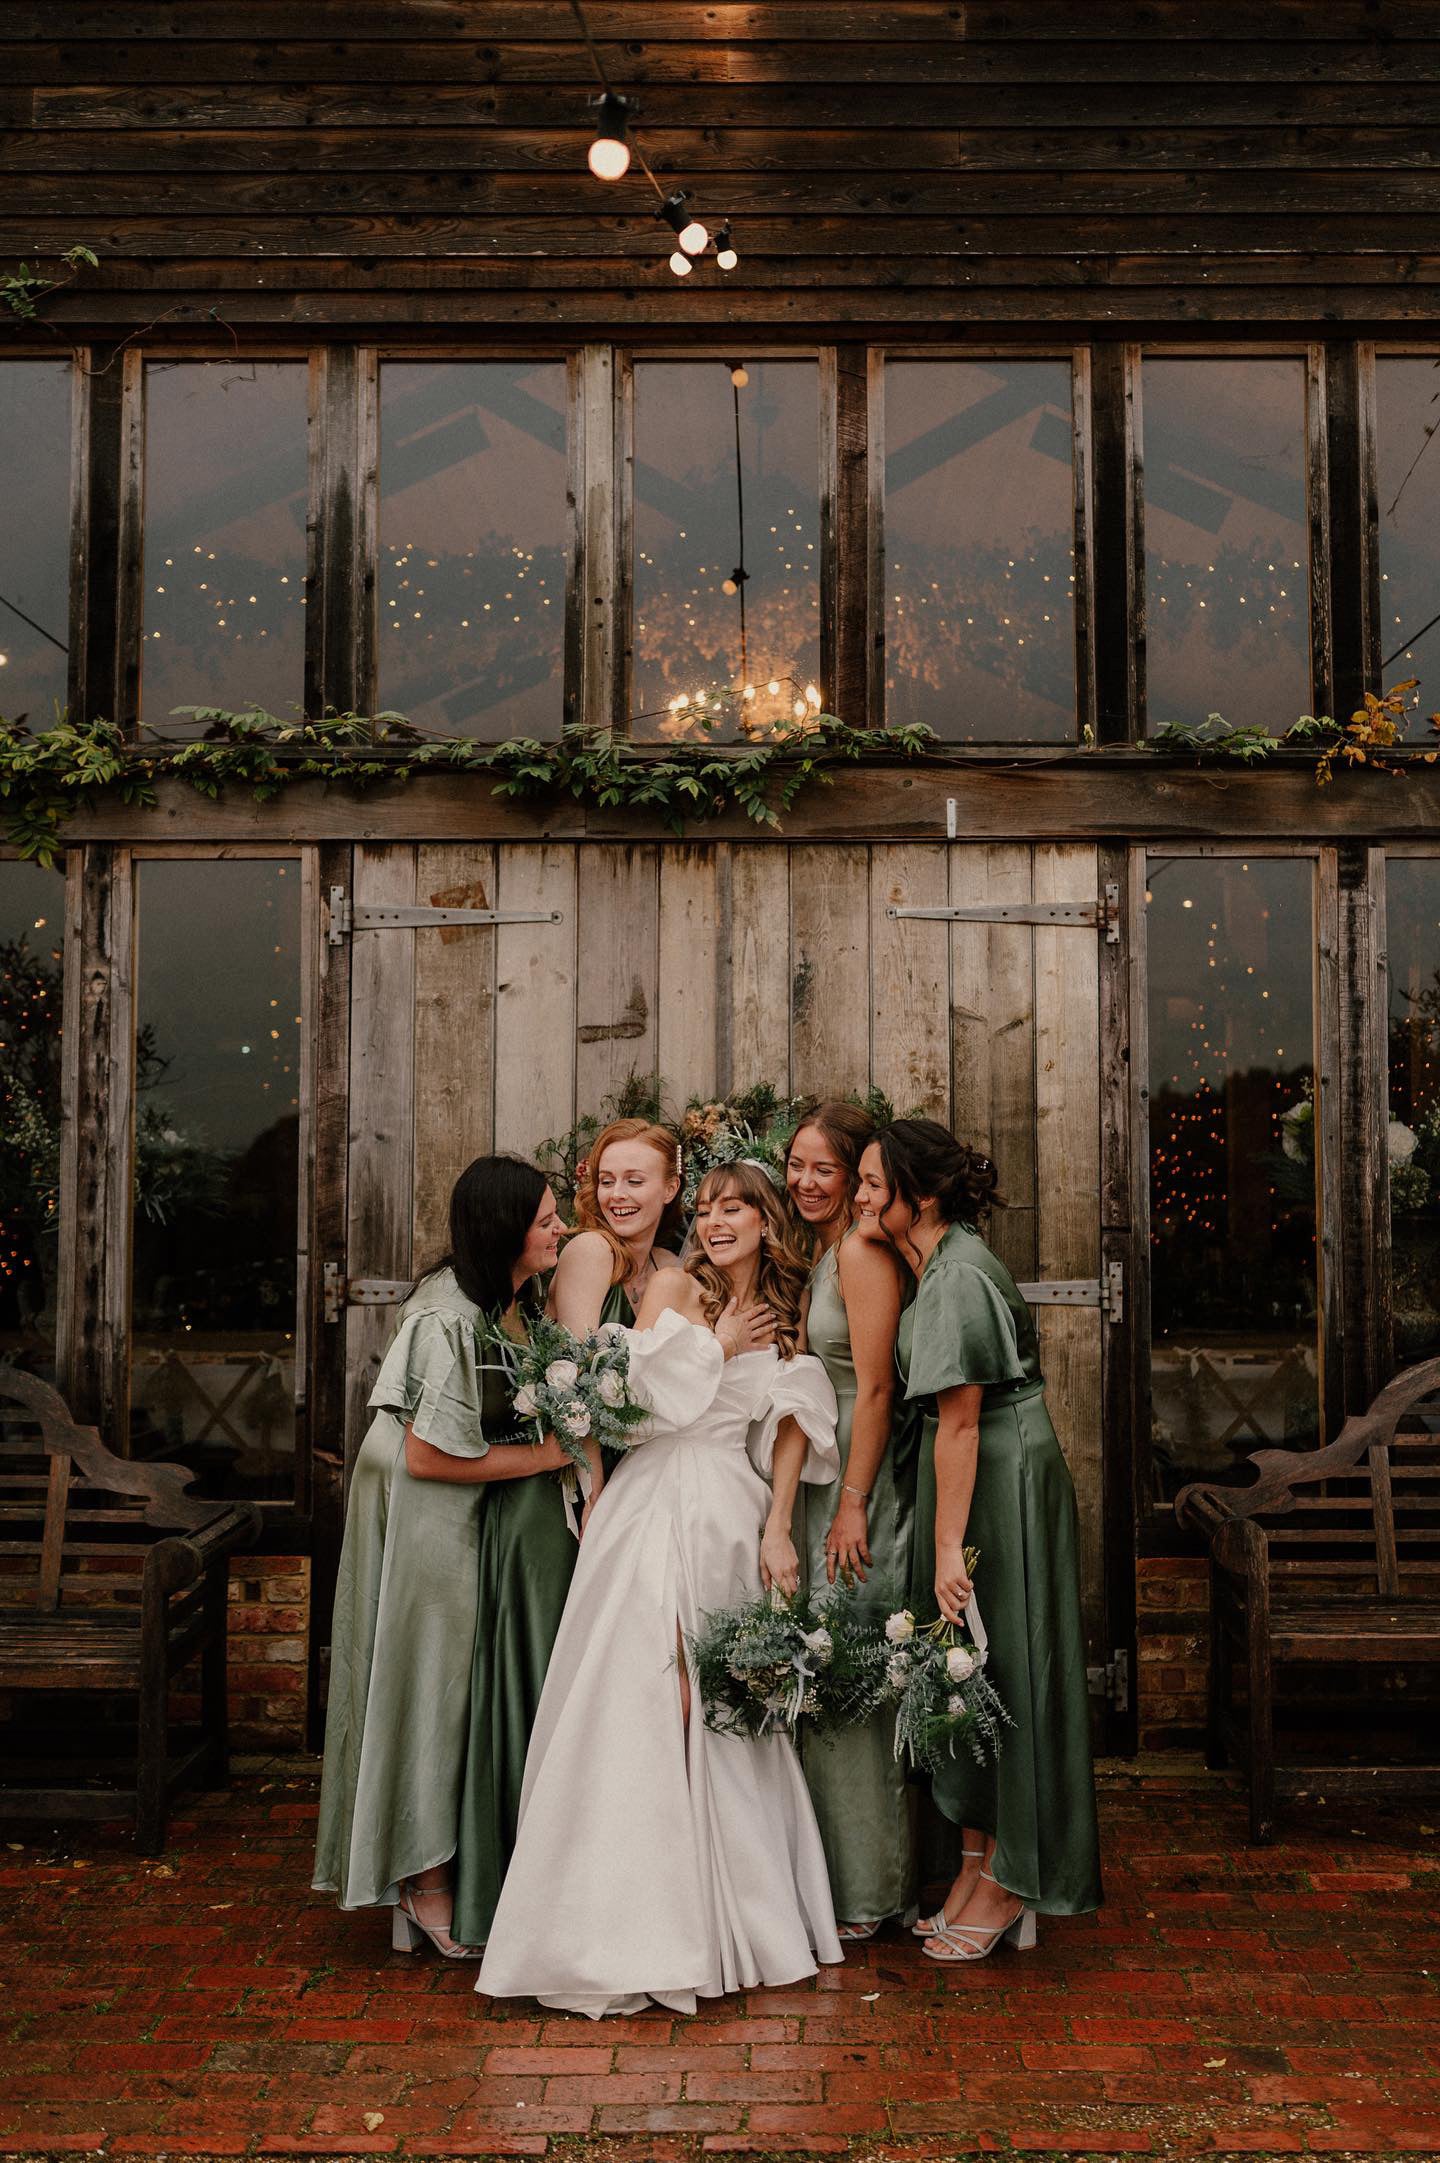 Olive and sage bridesmaids dresses